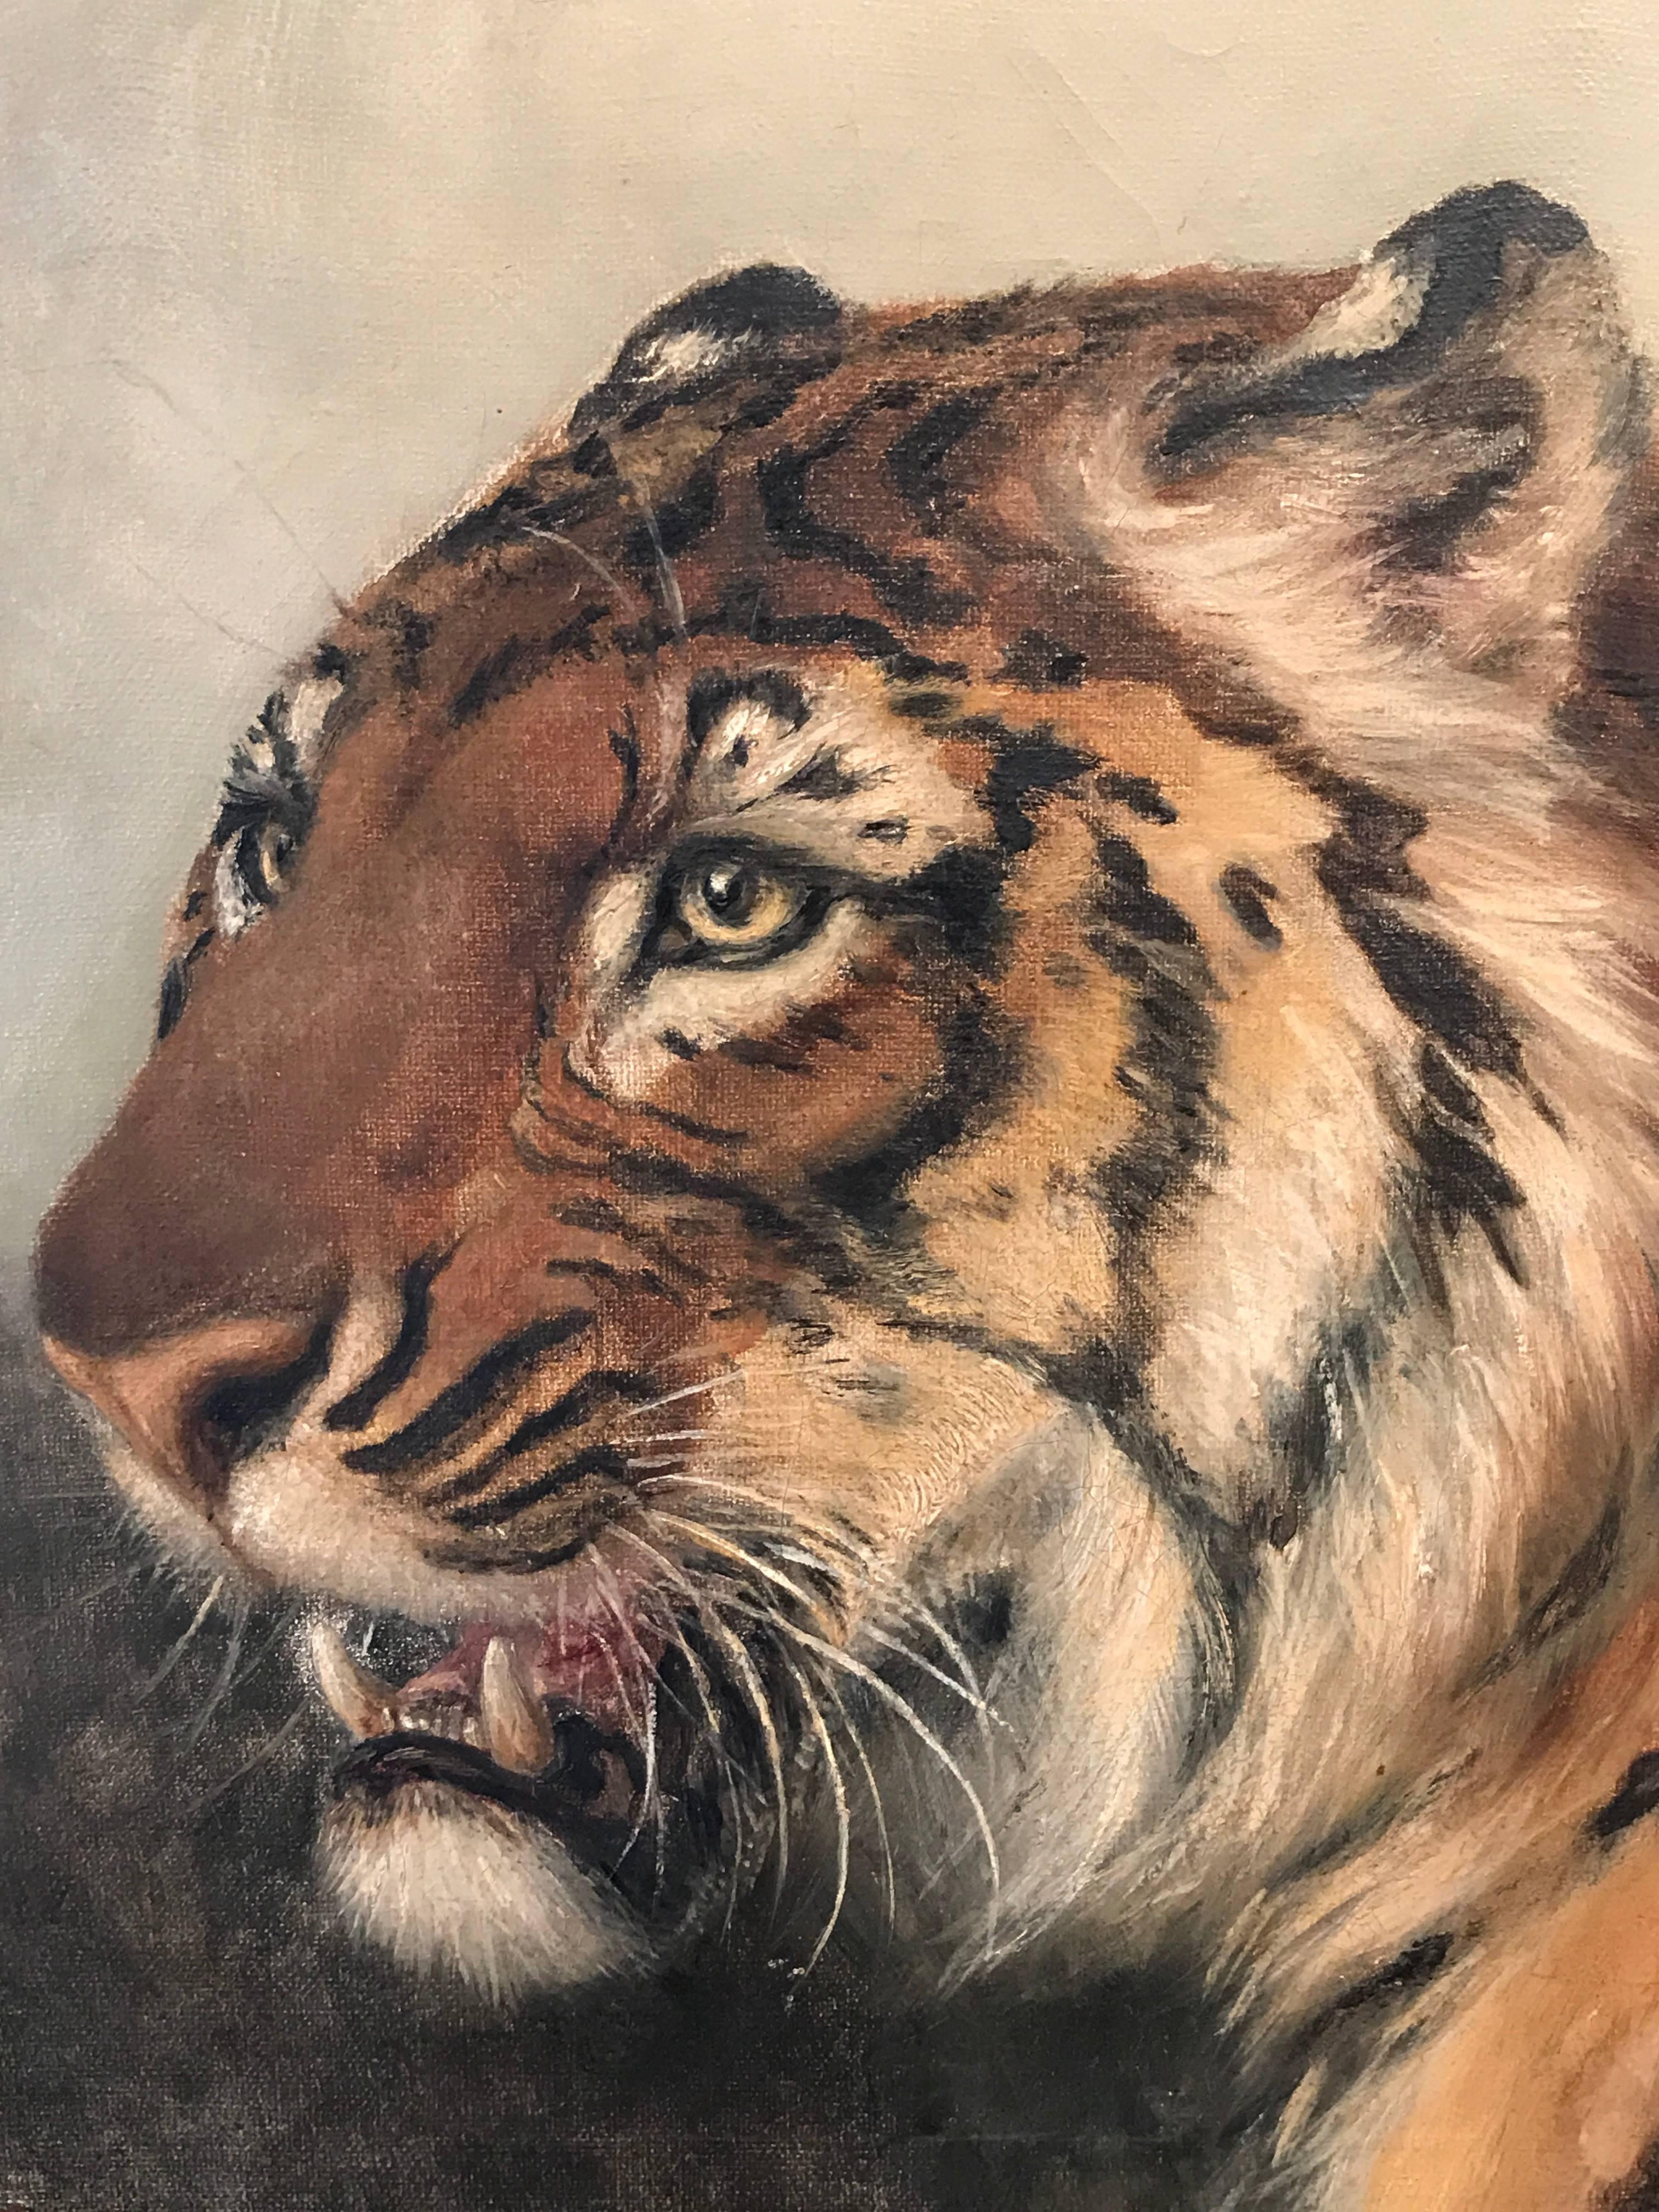 Original Antique English Oil Painting Head Portrait of Tiger - Brown Animal Painting by Unknown